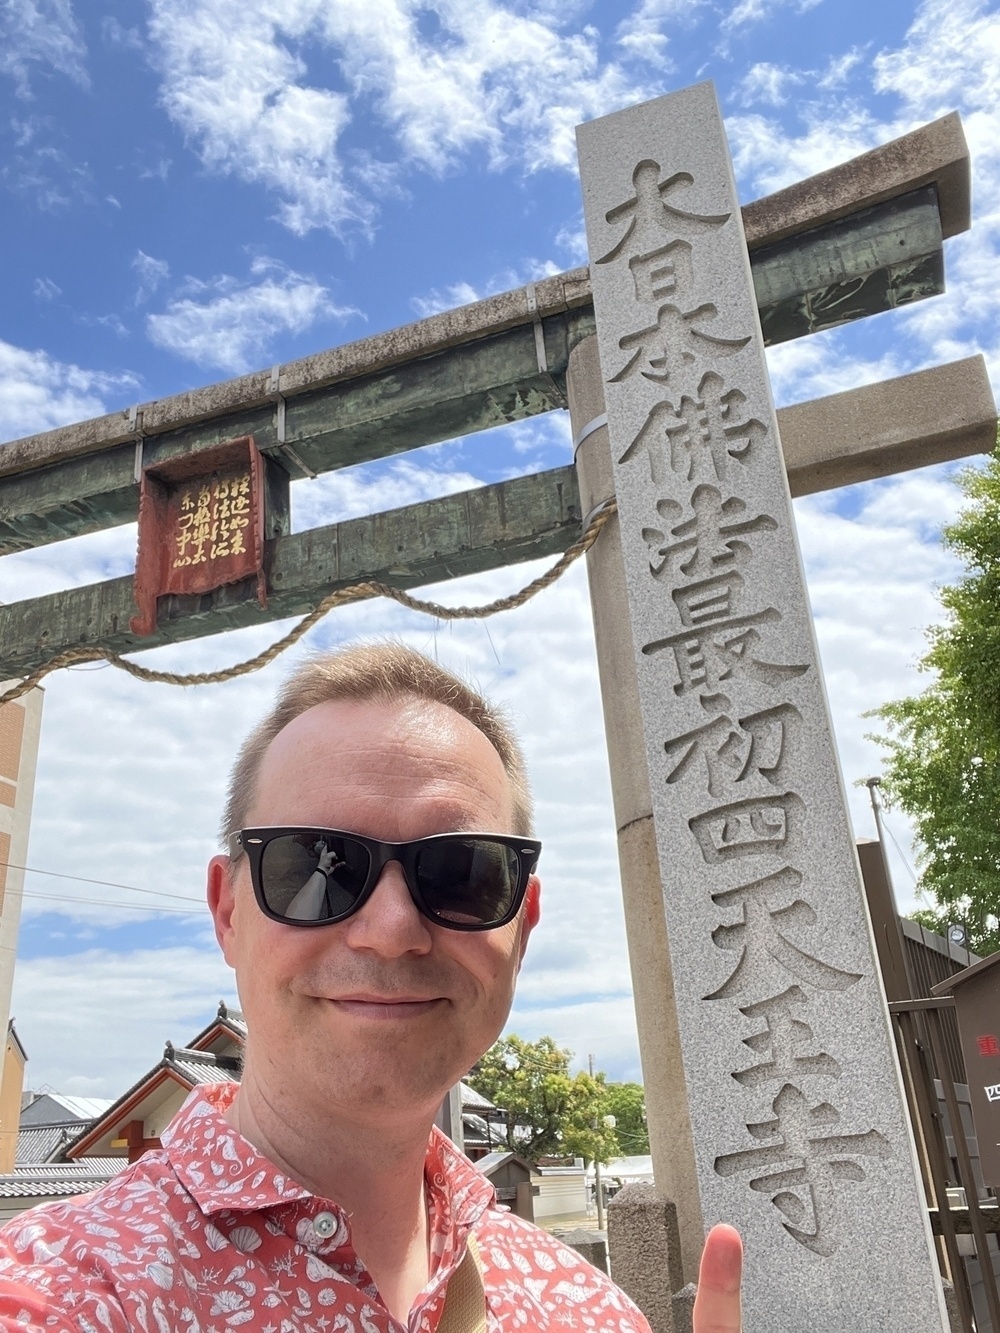 Chad at the gate of Shitenno-ji where the sign claims it is Japan’s first temple